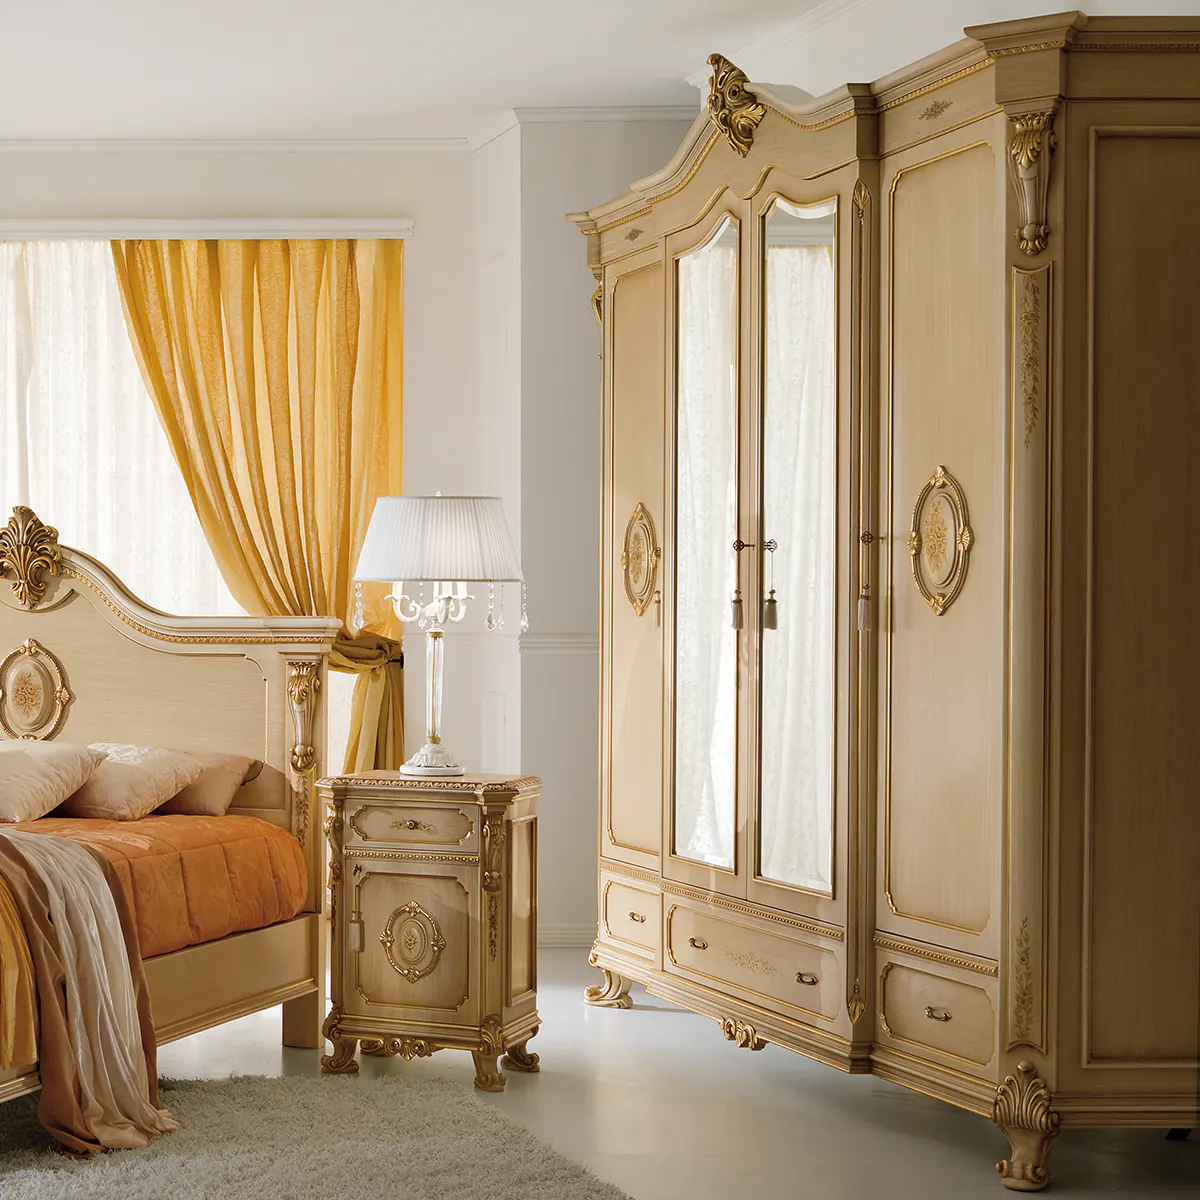 A French wardrobe will certainly give your bedroom mystery and luxury